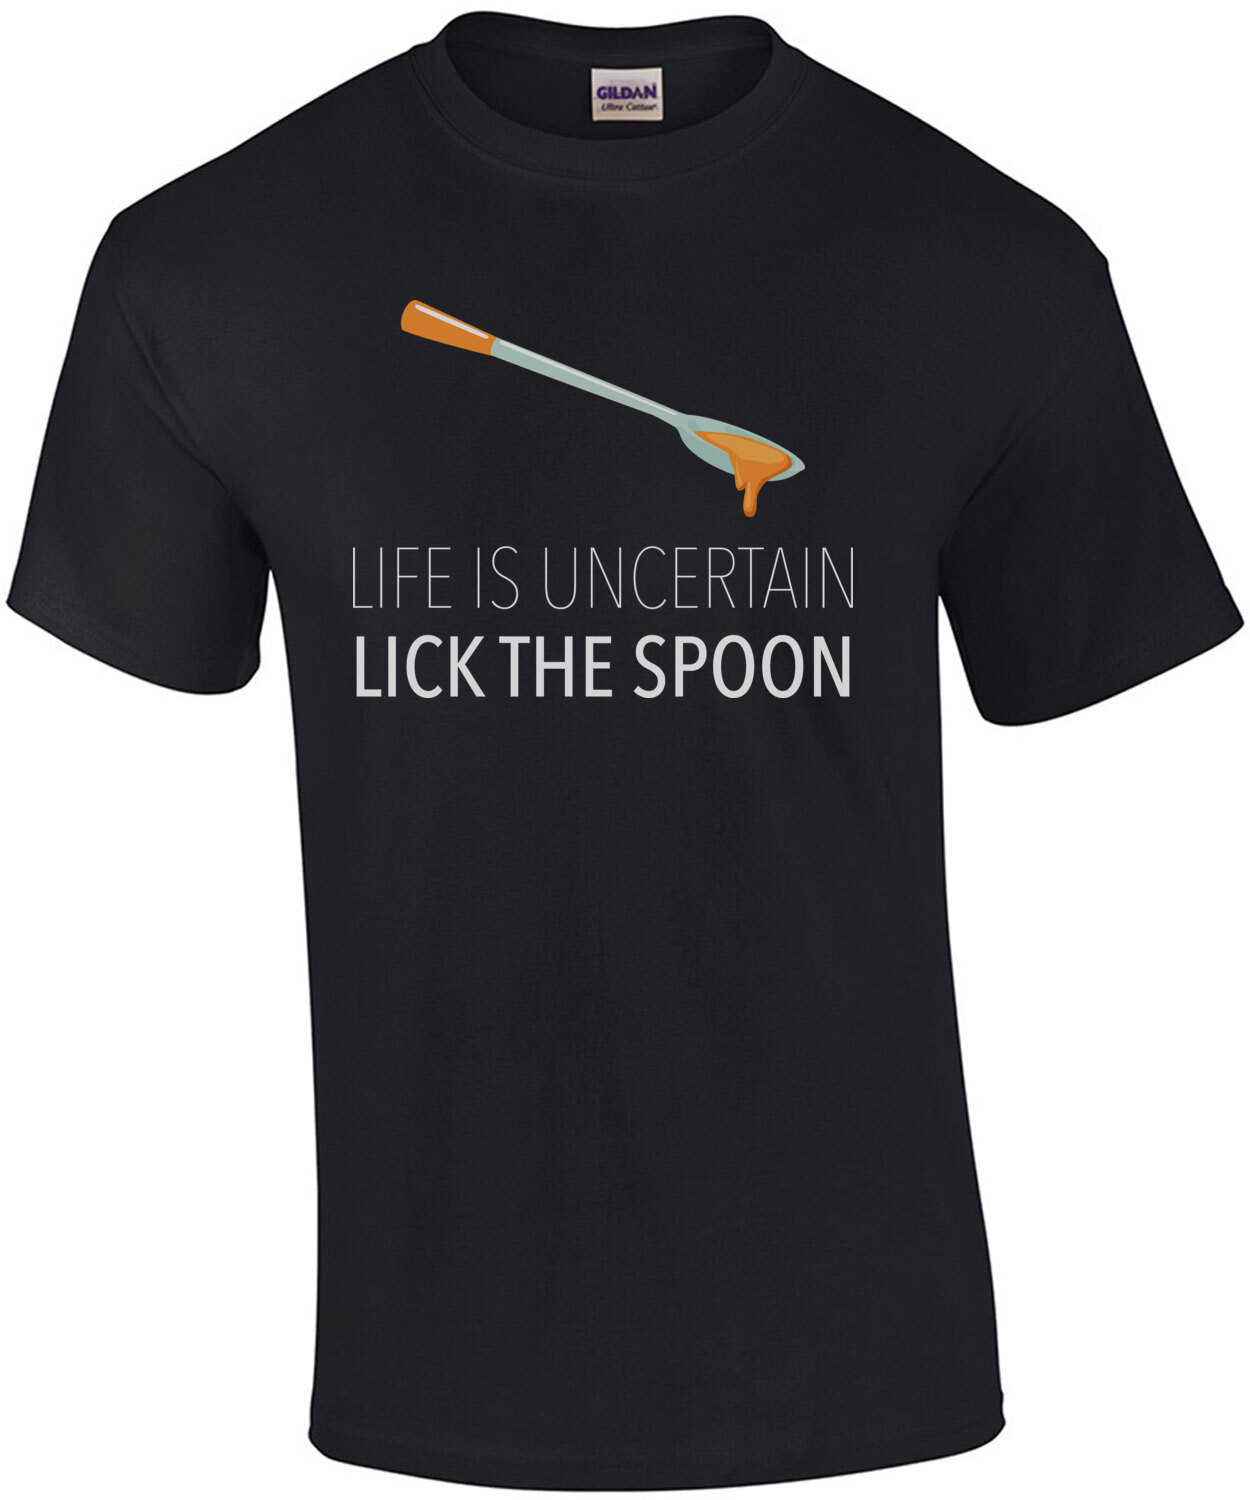 Life is uncertain - lick the spoon - funny honey t-shirt